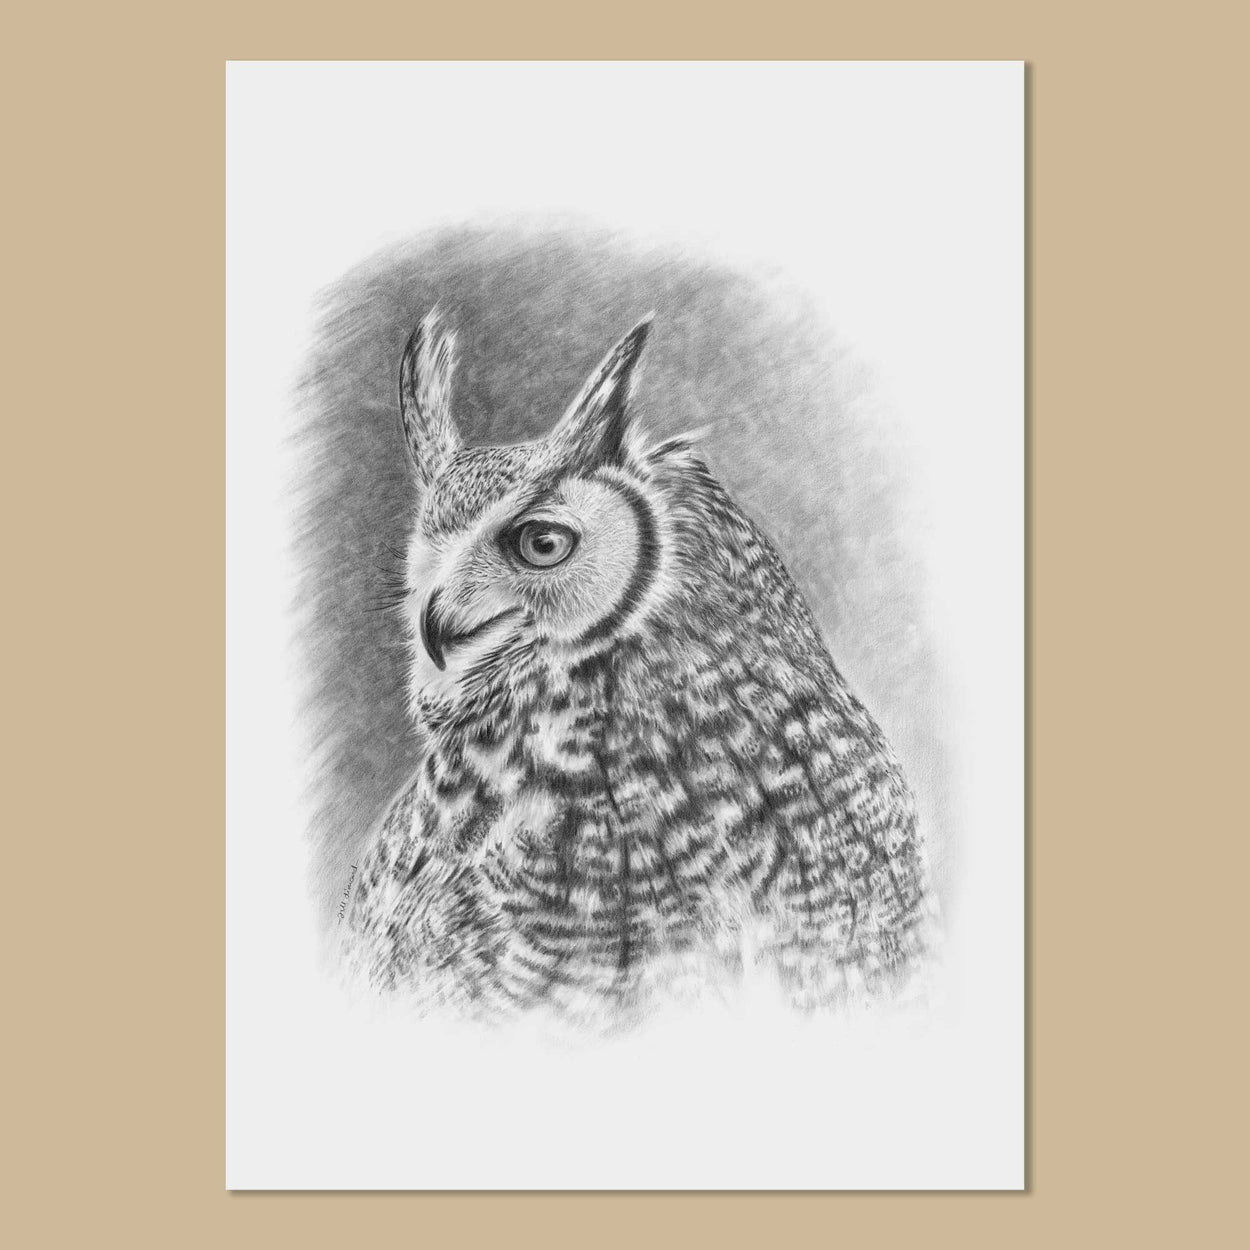 Black and white drawing of a great horned owl facing to the left